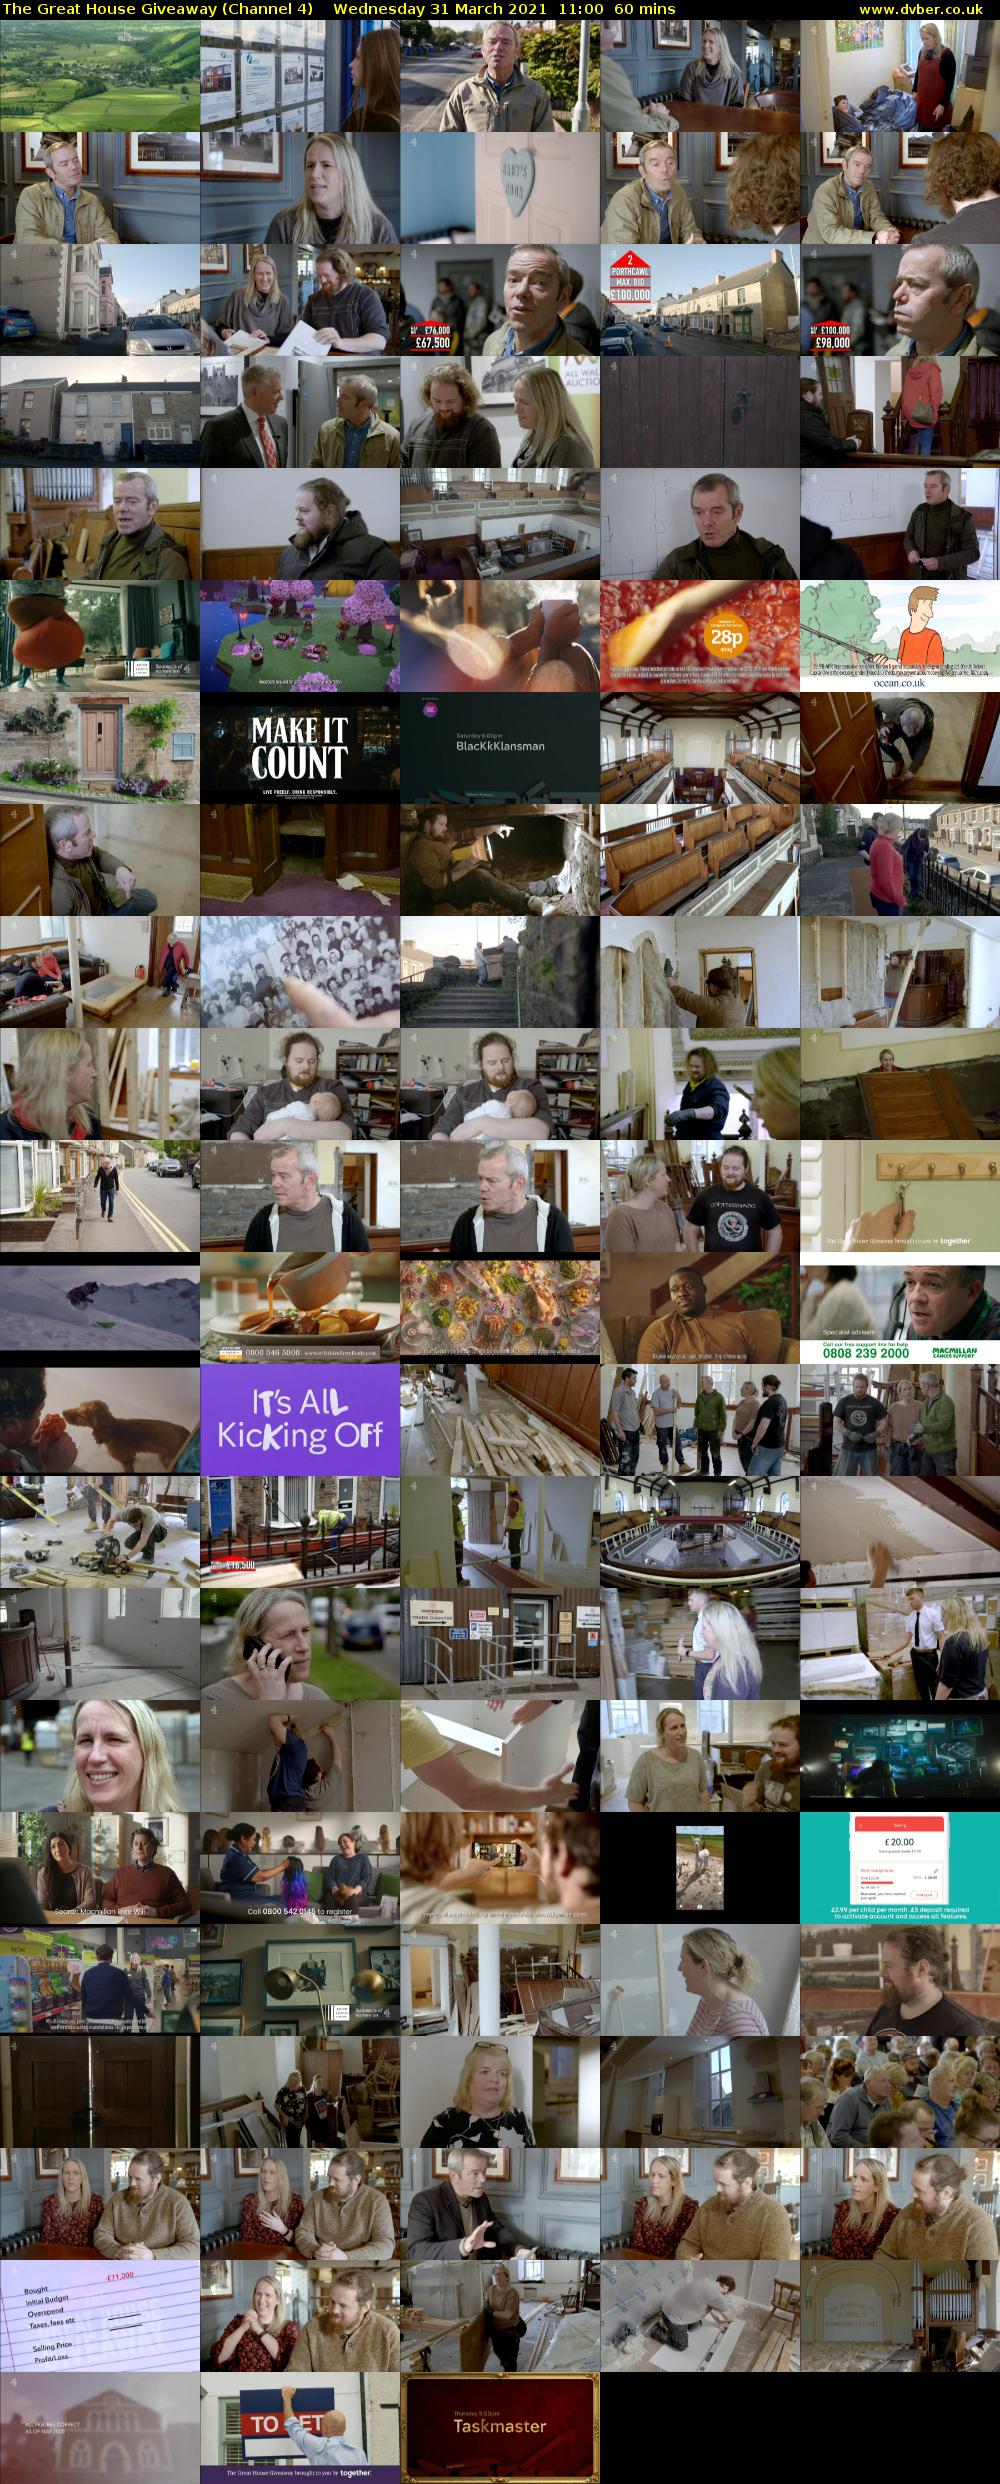 The Great House Giveaway (Channel 4) Wednesday 31 March 2021 11:00 - 12:00